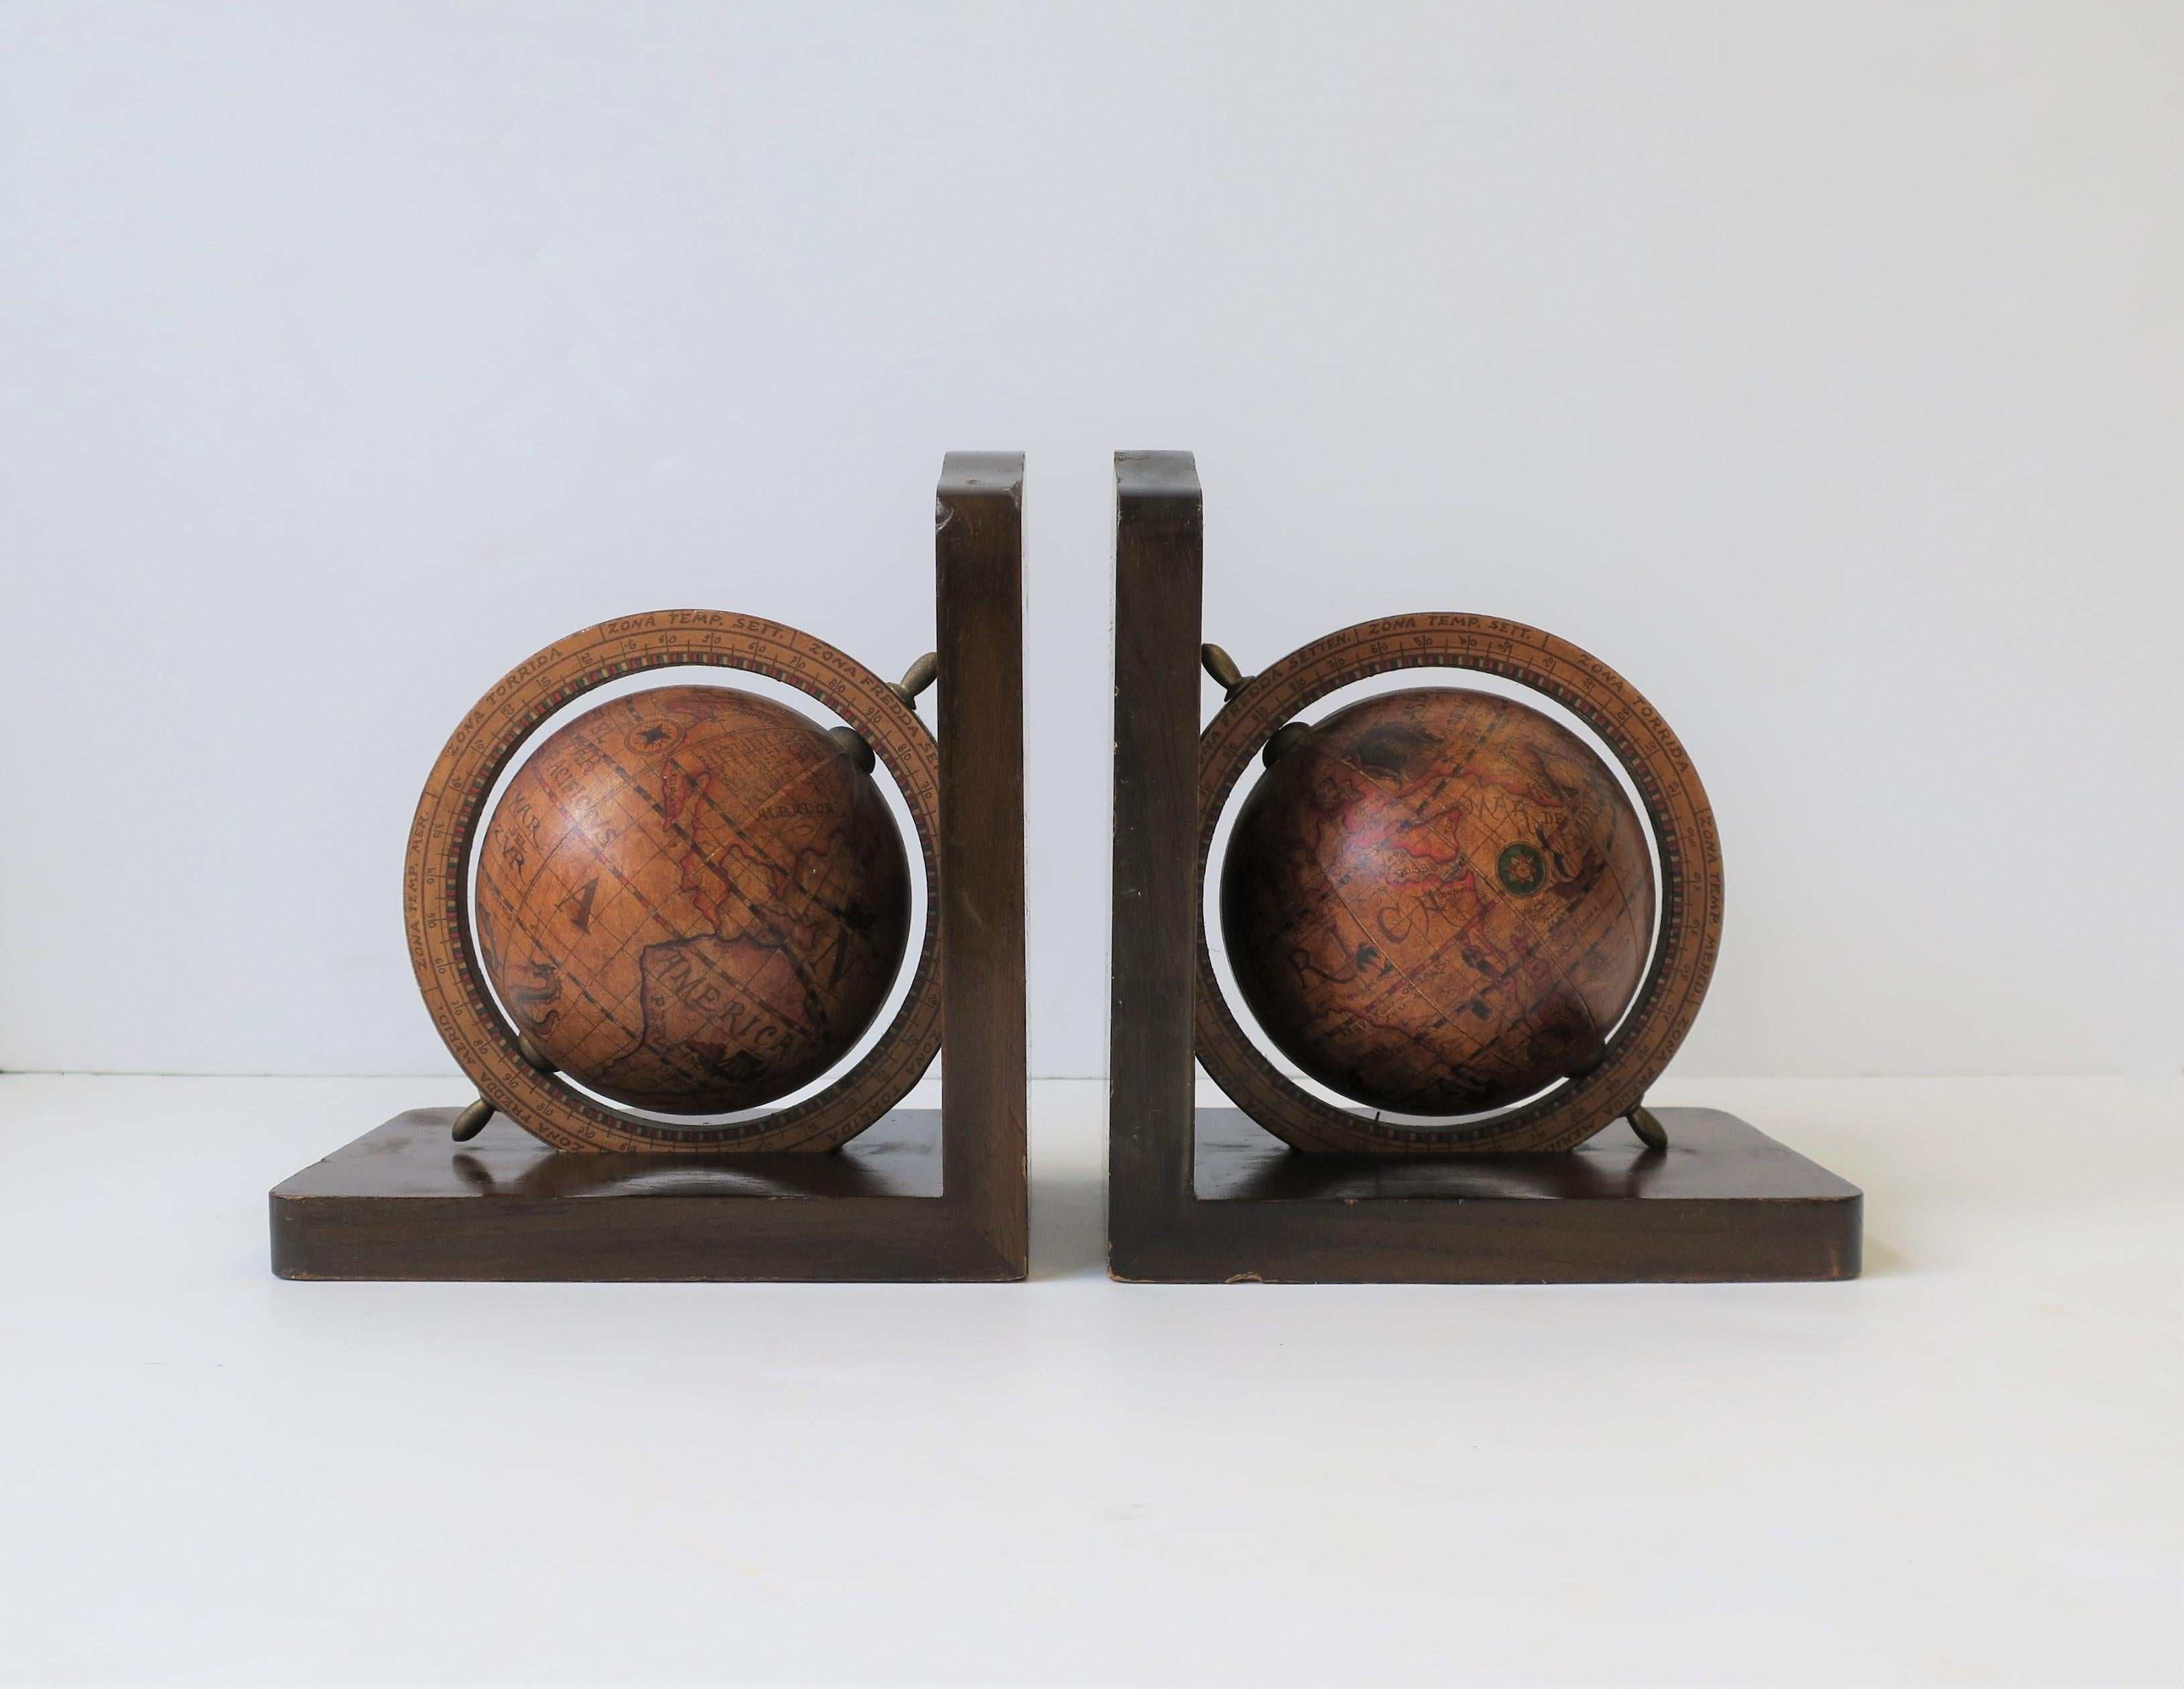 A mid-20th century pair of Italian world globe bookends with brass accents. Marked 